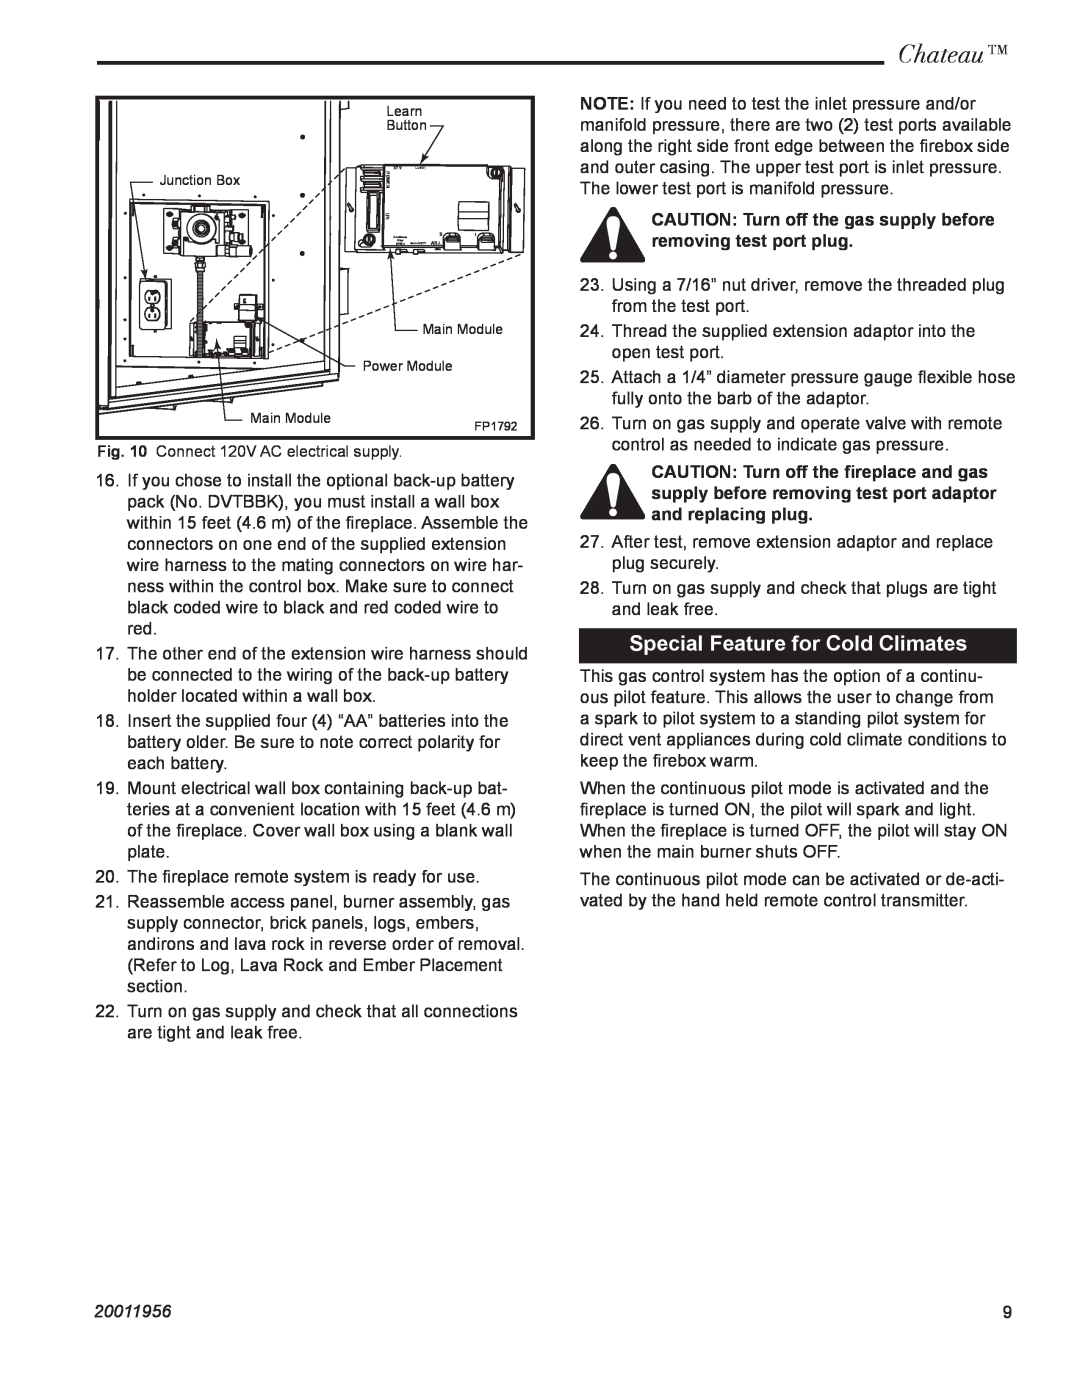 Vermont Casting DVT44 installation instructions Special Feature for Cold Climates, Chateau, 20011956 